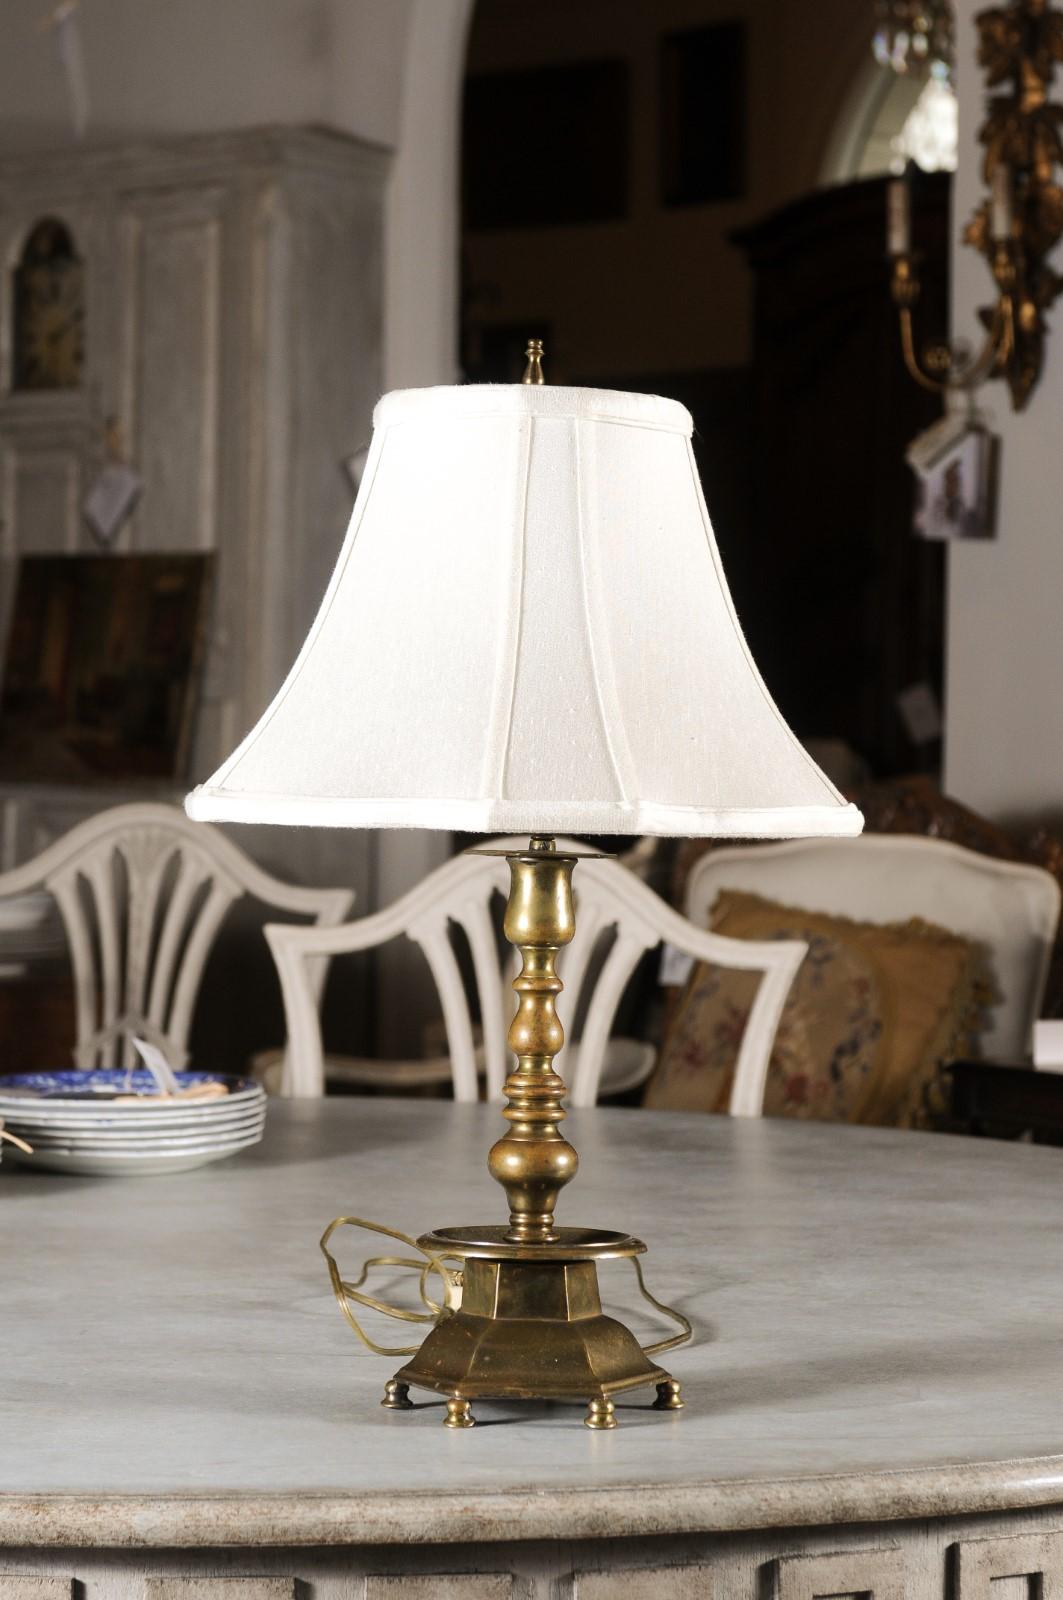 A French Napoléon III period brass candlestick table lamp from the late 19th century, with hexagonal base and newer shade. Created in France at the end of Emperor Napoléon III's reign, this lamp features a brass candlestick resting on an hexagonal